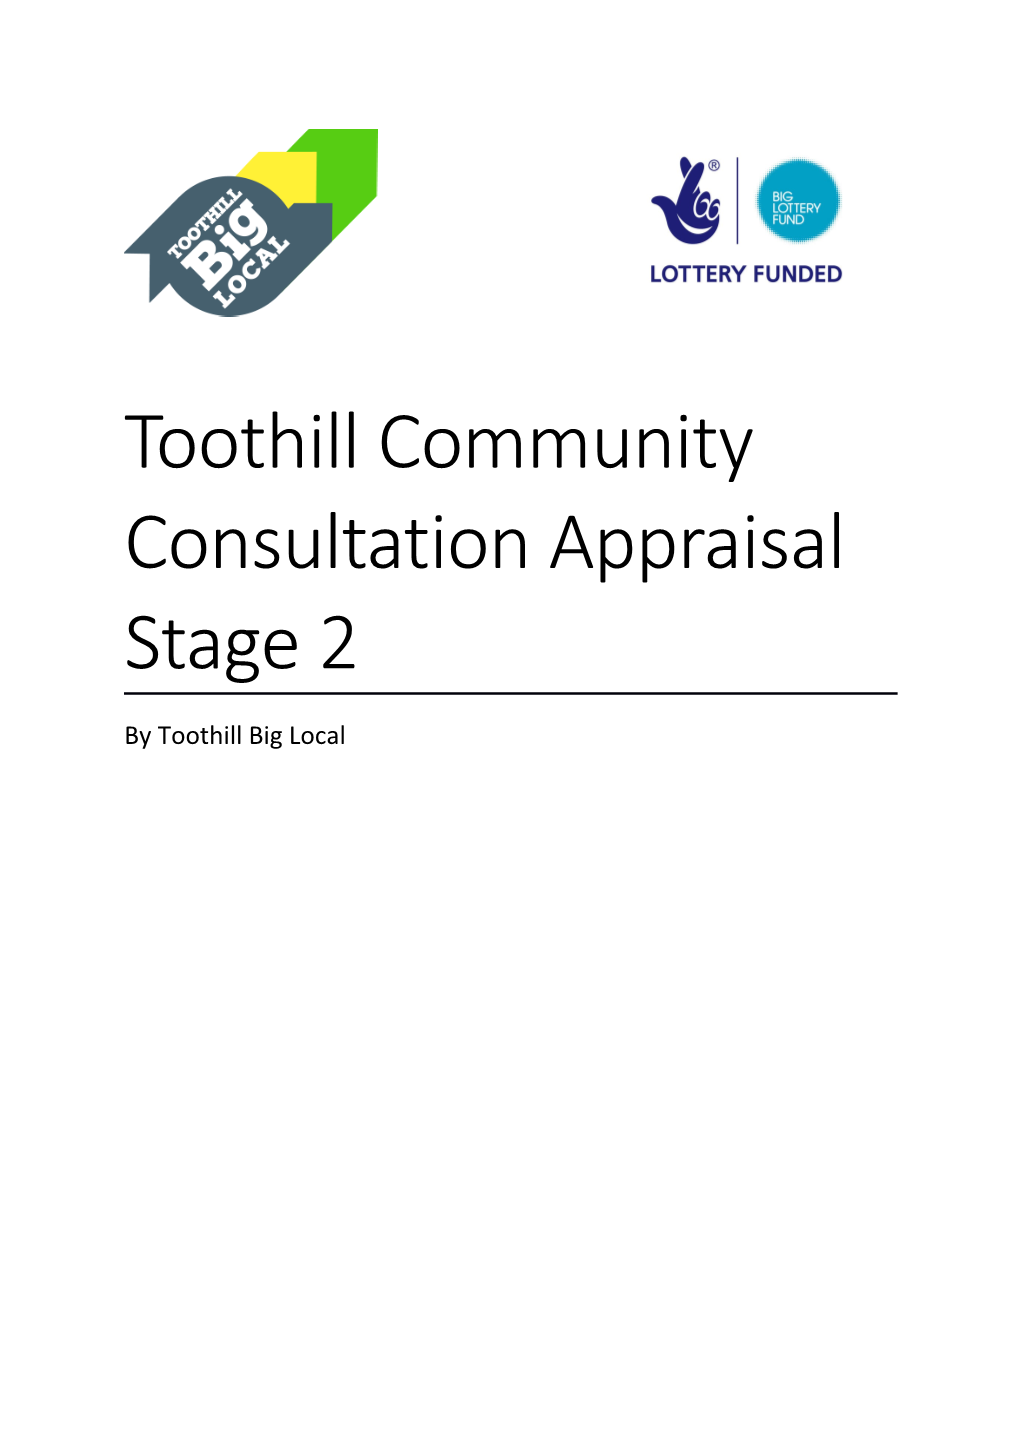 Toothill Community Consultation Appraisal Stage 2